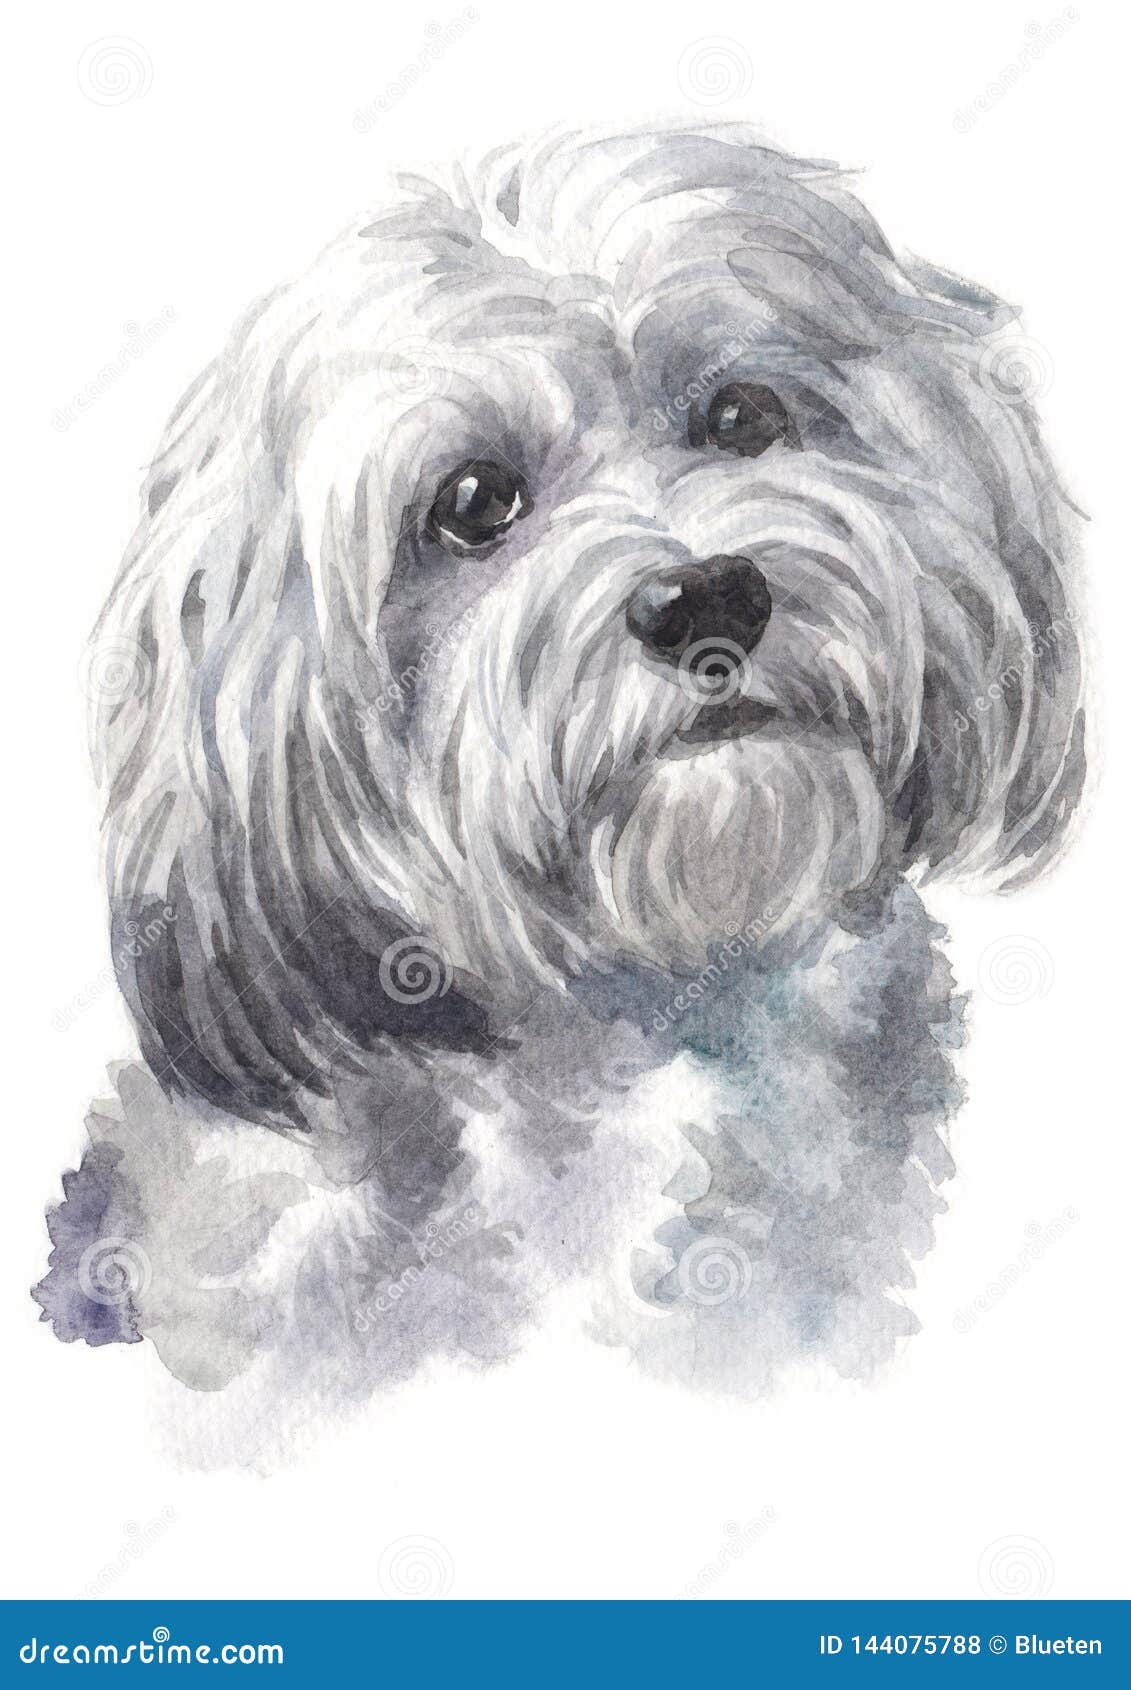 HAVA PUPPY Havanese 8x10 Print DOG Painting by Sherry 